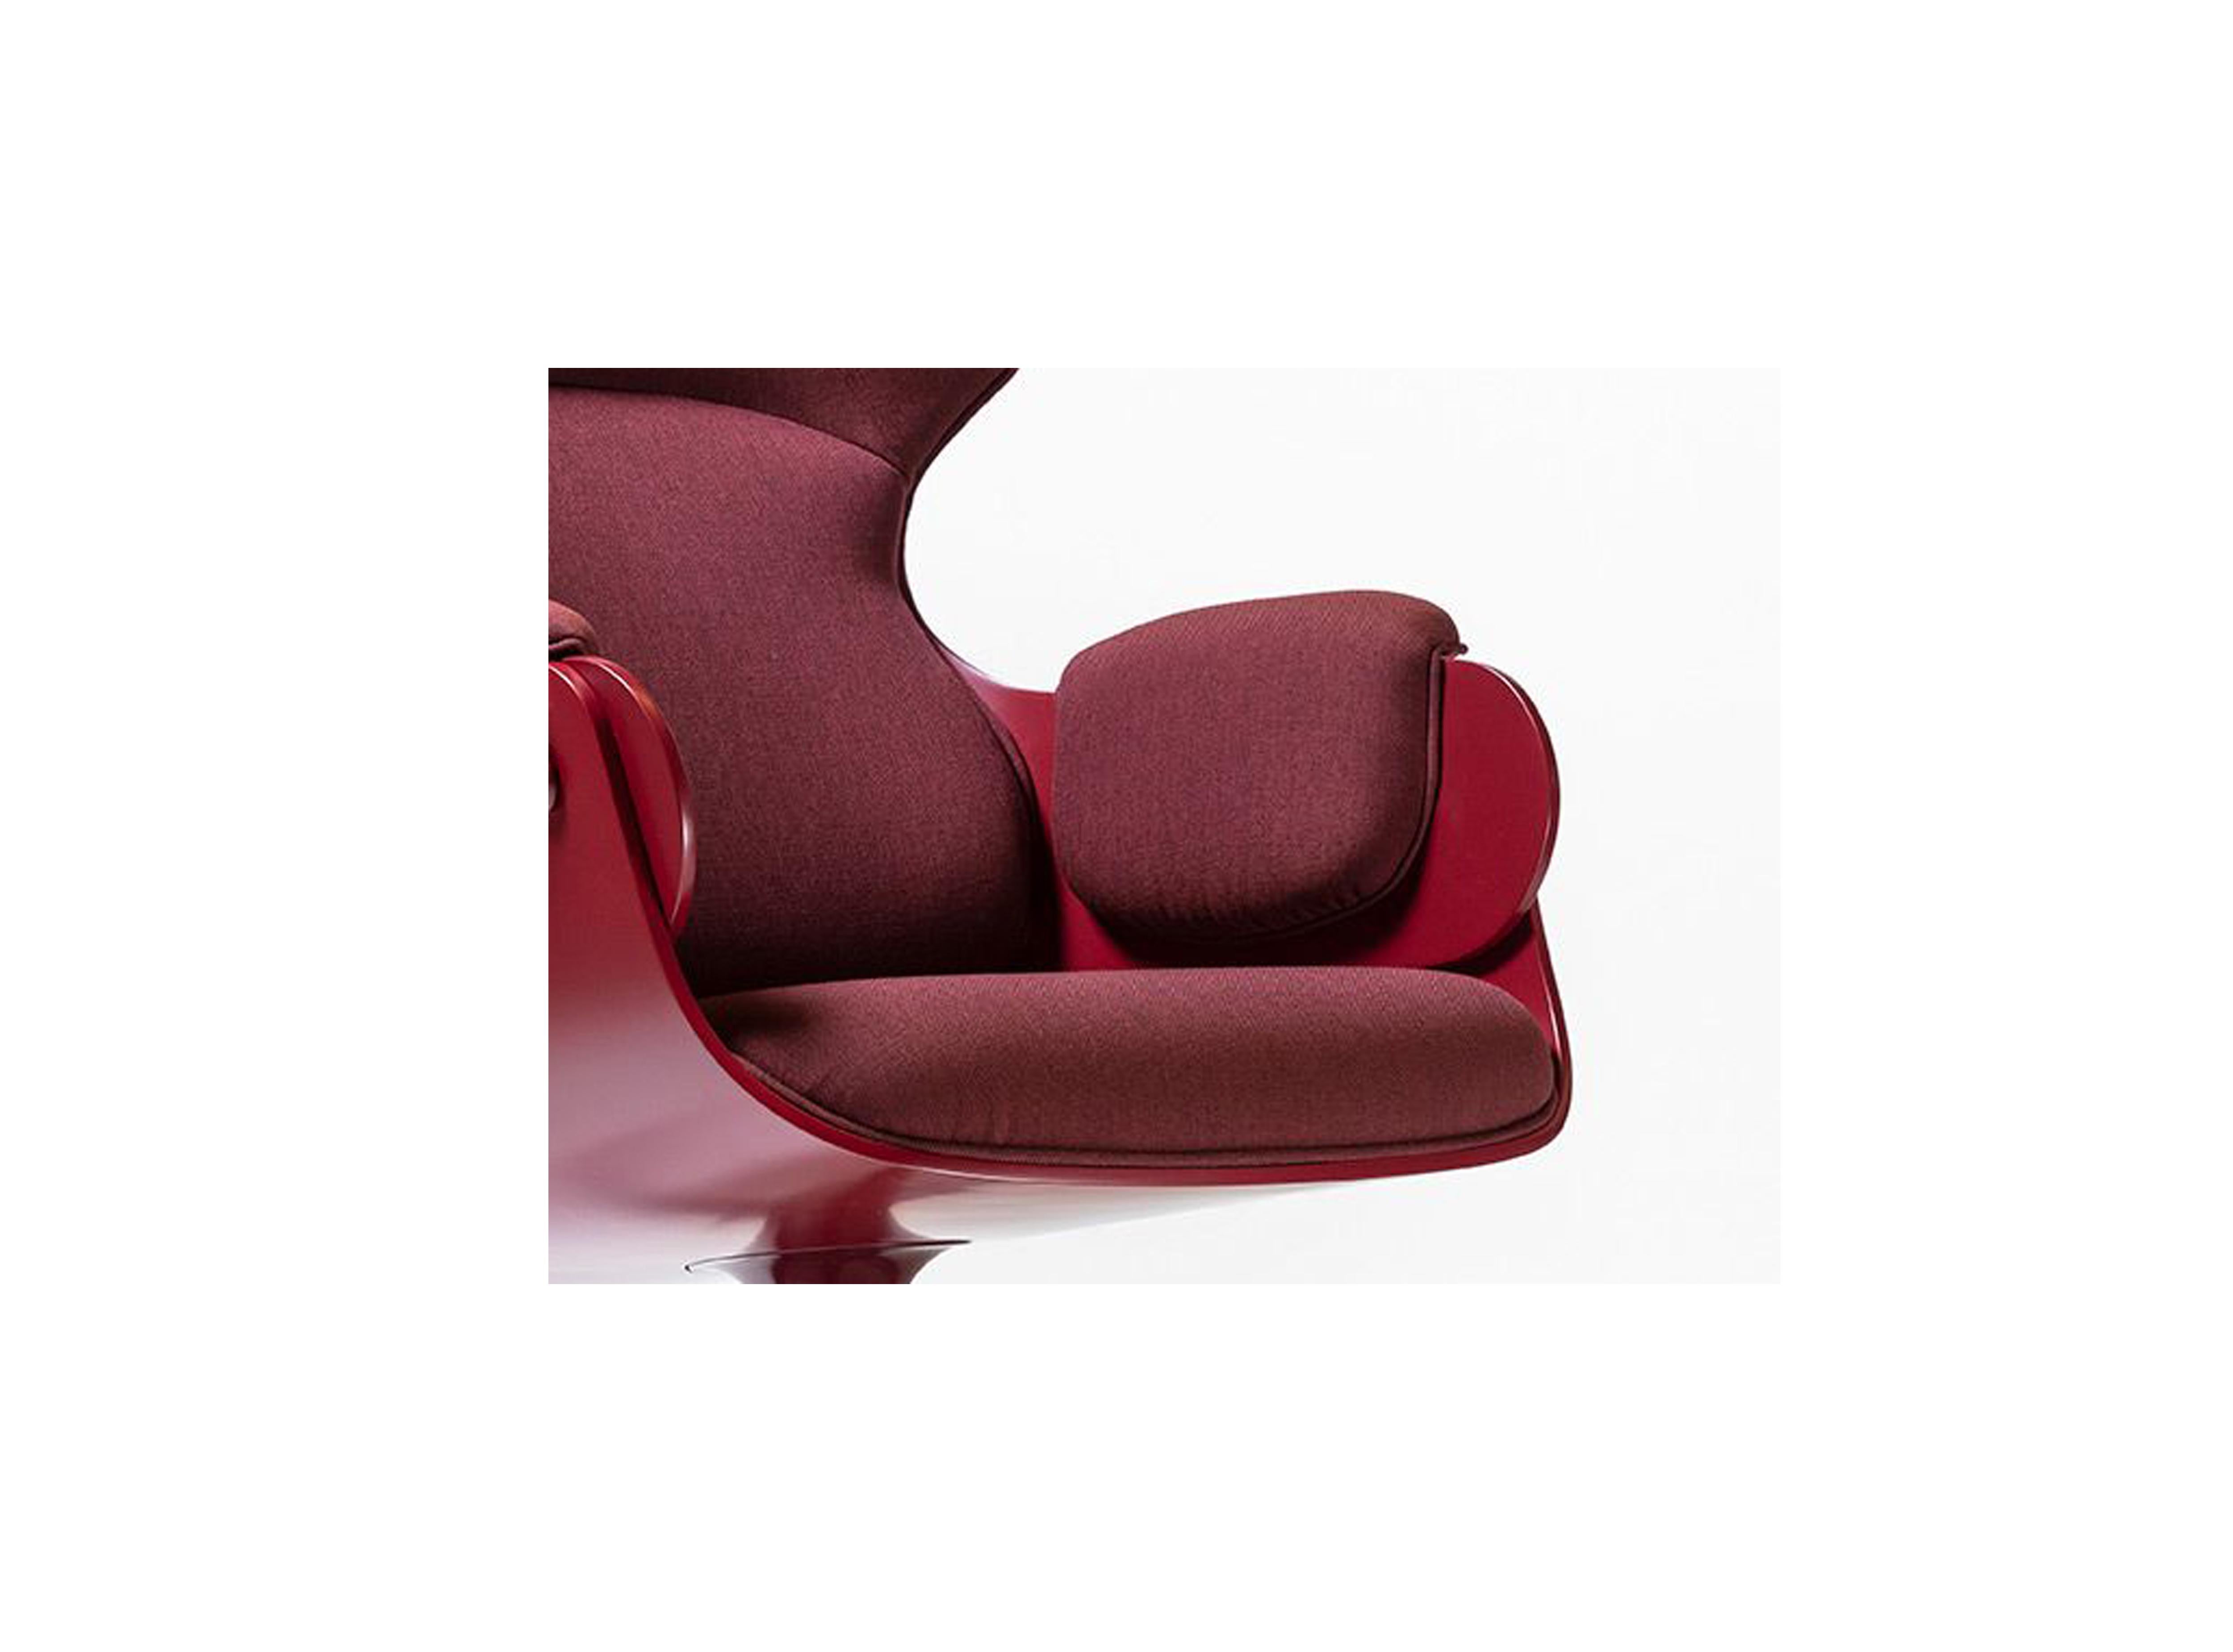 Jaime Hayon, Contemporary, Playwood Walnut Granet Upholstery Lounger Armchair In New Condition For Sale In Barcelona, Barcelona